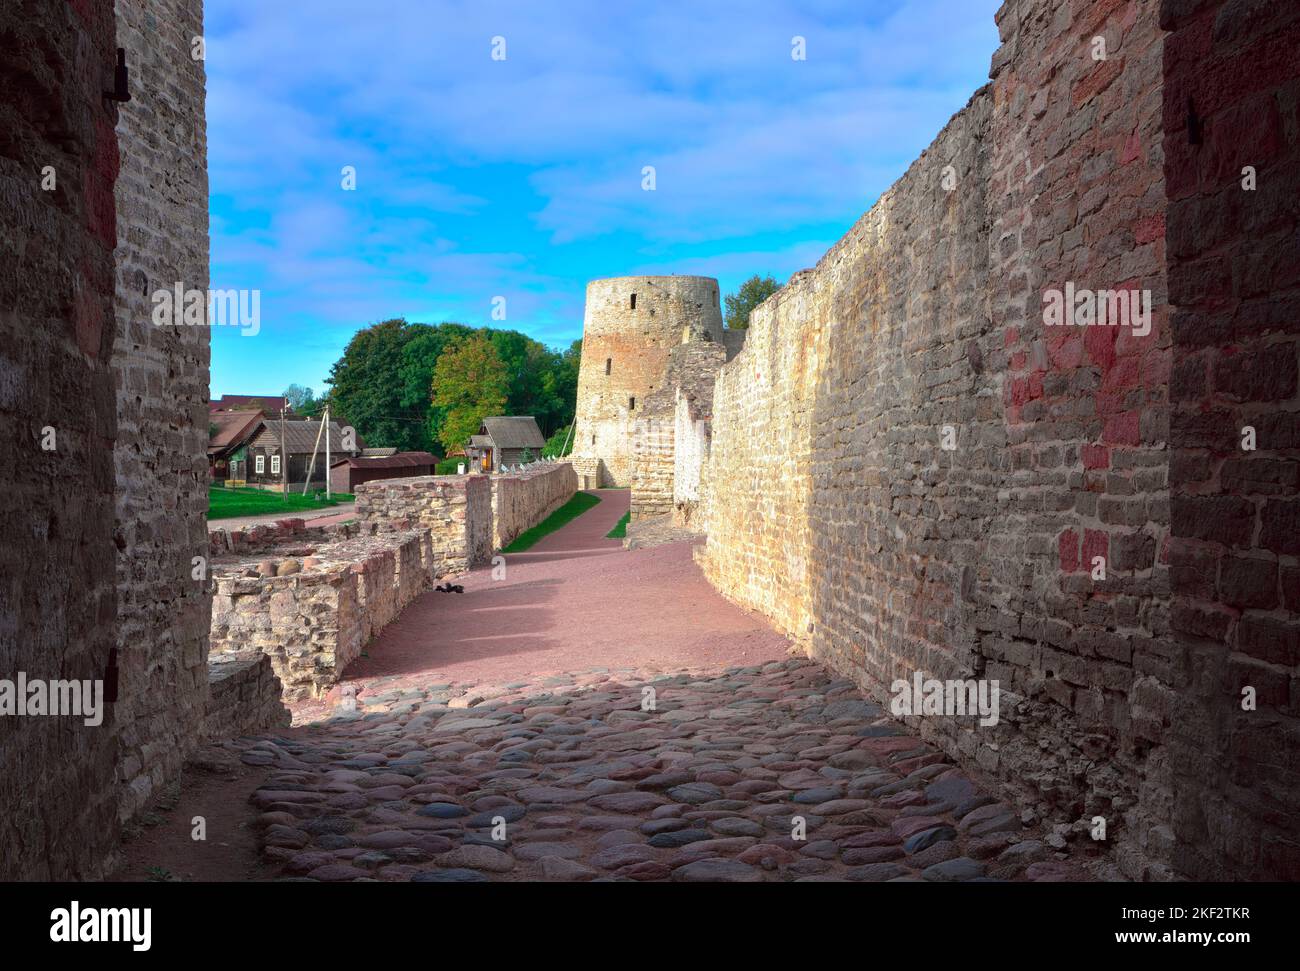 The old stone Izborskaya fortress. Defensive corridor at the fortress walls, an architectural monument of the XIV-XVII century. Izborsk, Pskov region, Stock Photo